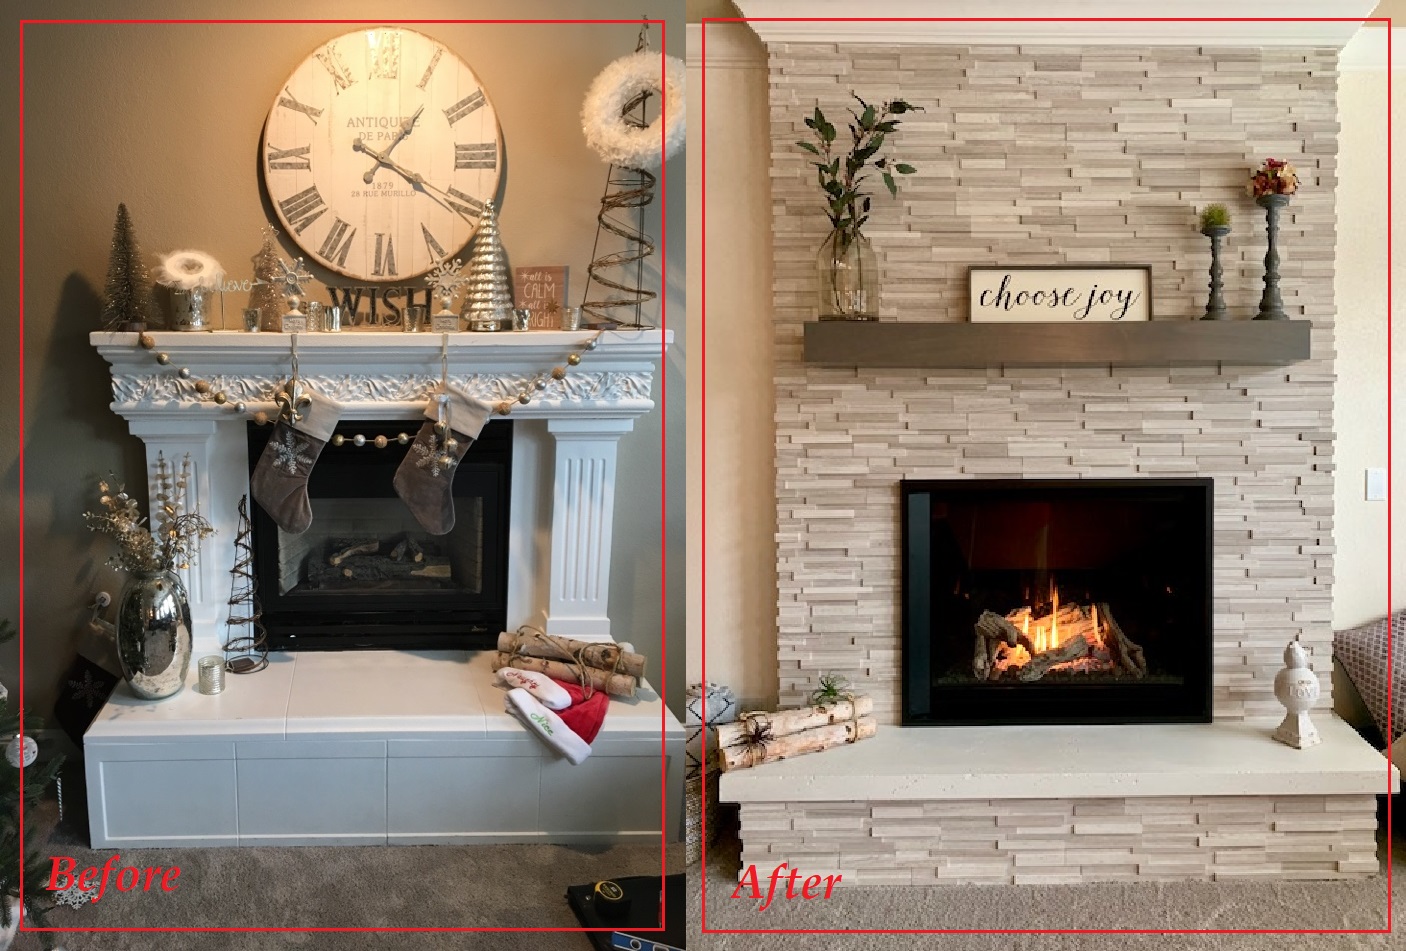 A new fireplace inside of a home that was purchased from Pacific Hearth & Home, Inc. in Rancho Cordova, CA